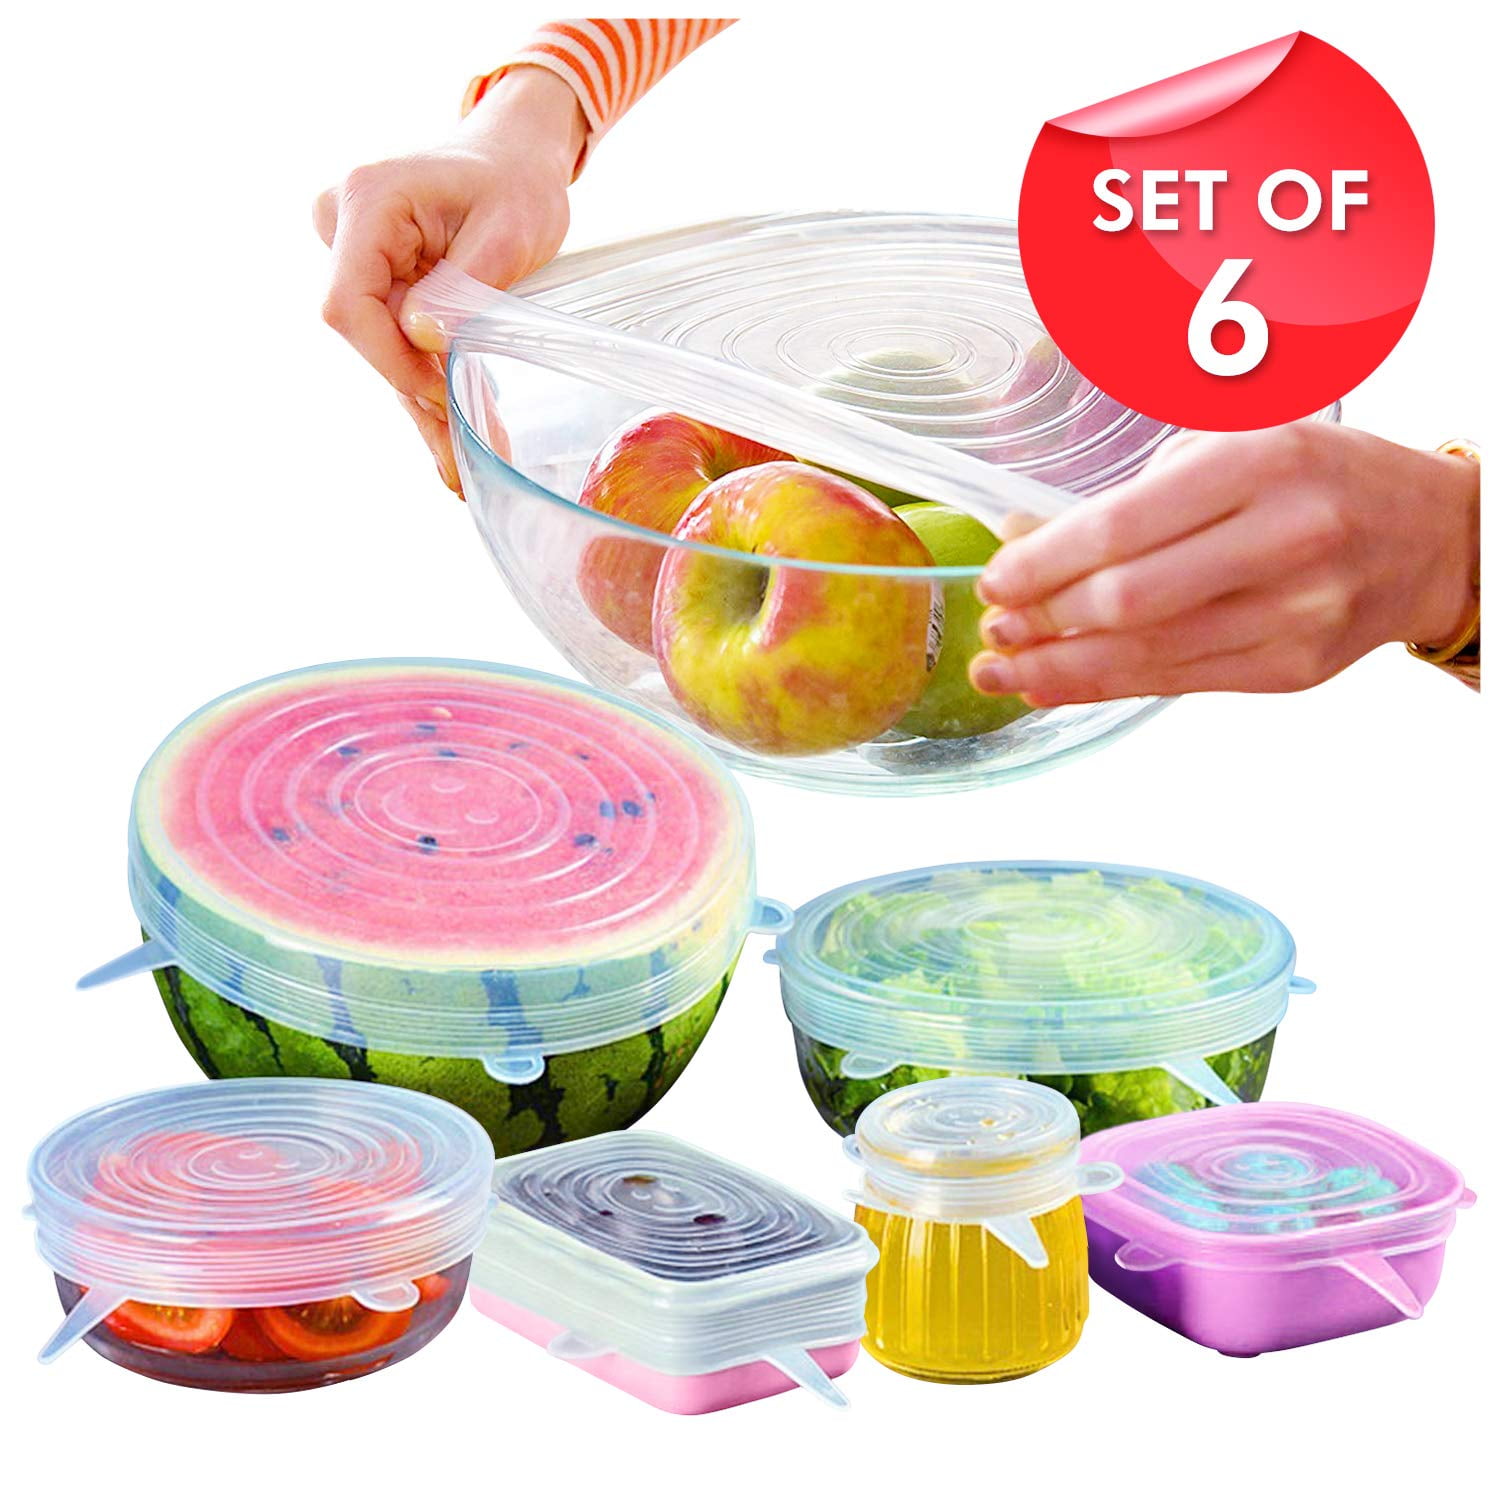 Stretch Lids Silicone Food Storage Container Lids - Reusable Premium  24-Pack - Leak-Proof & Eco-Friendly Covers for Fresh Food Storage in  Plastic